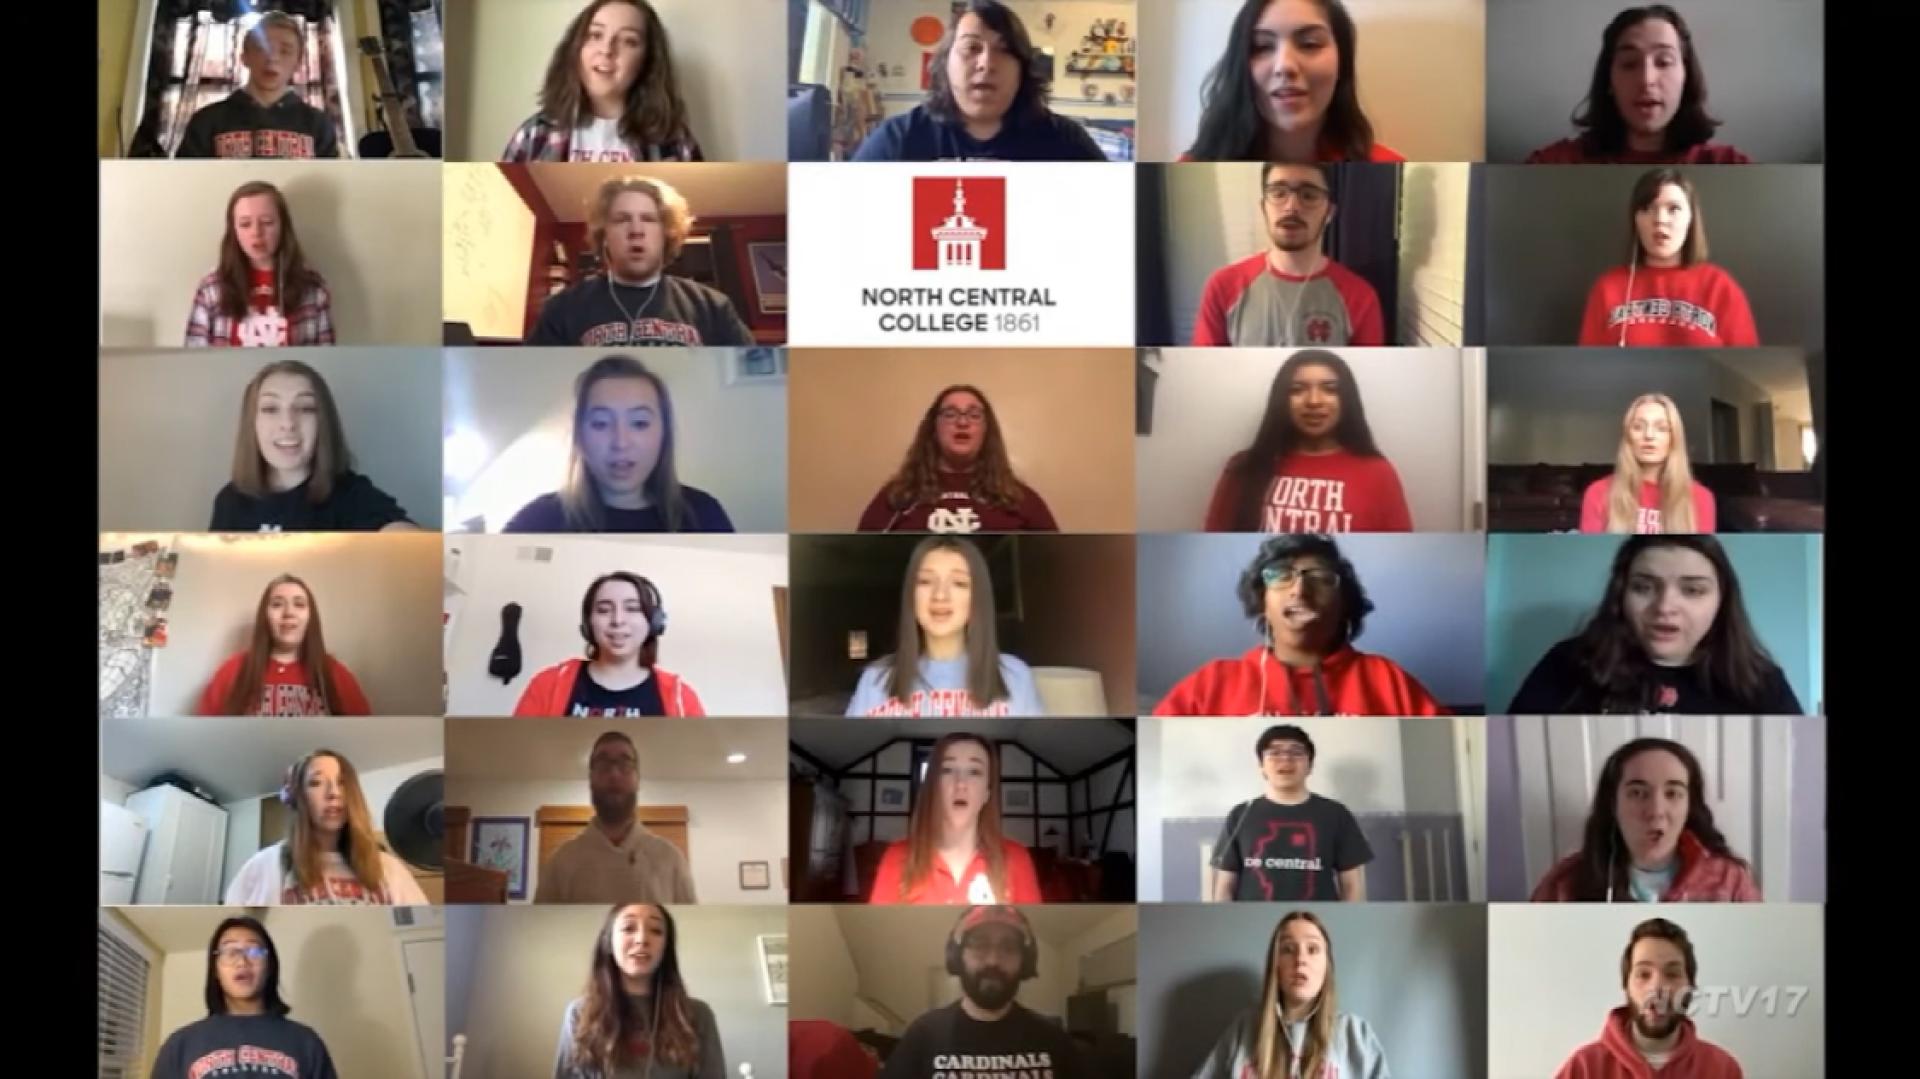 North Central's virtual choir performs the College alma mater.